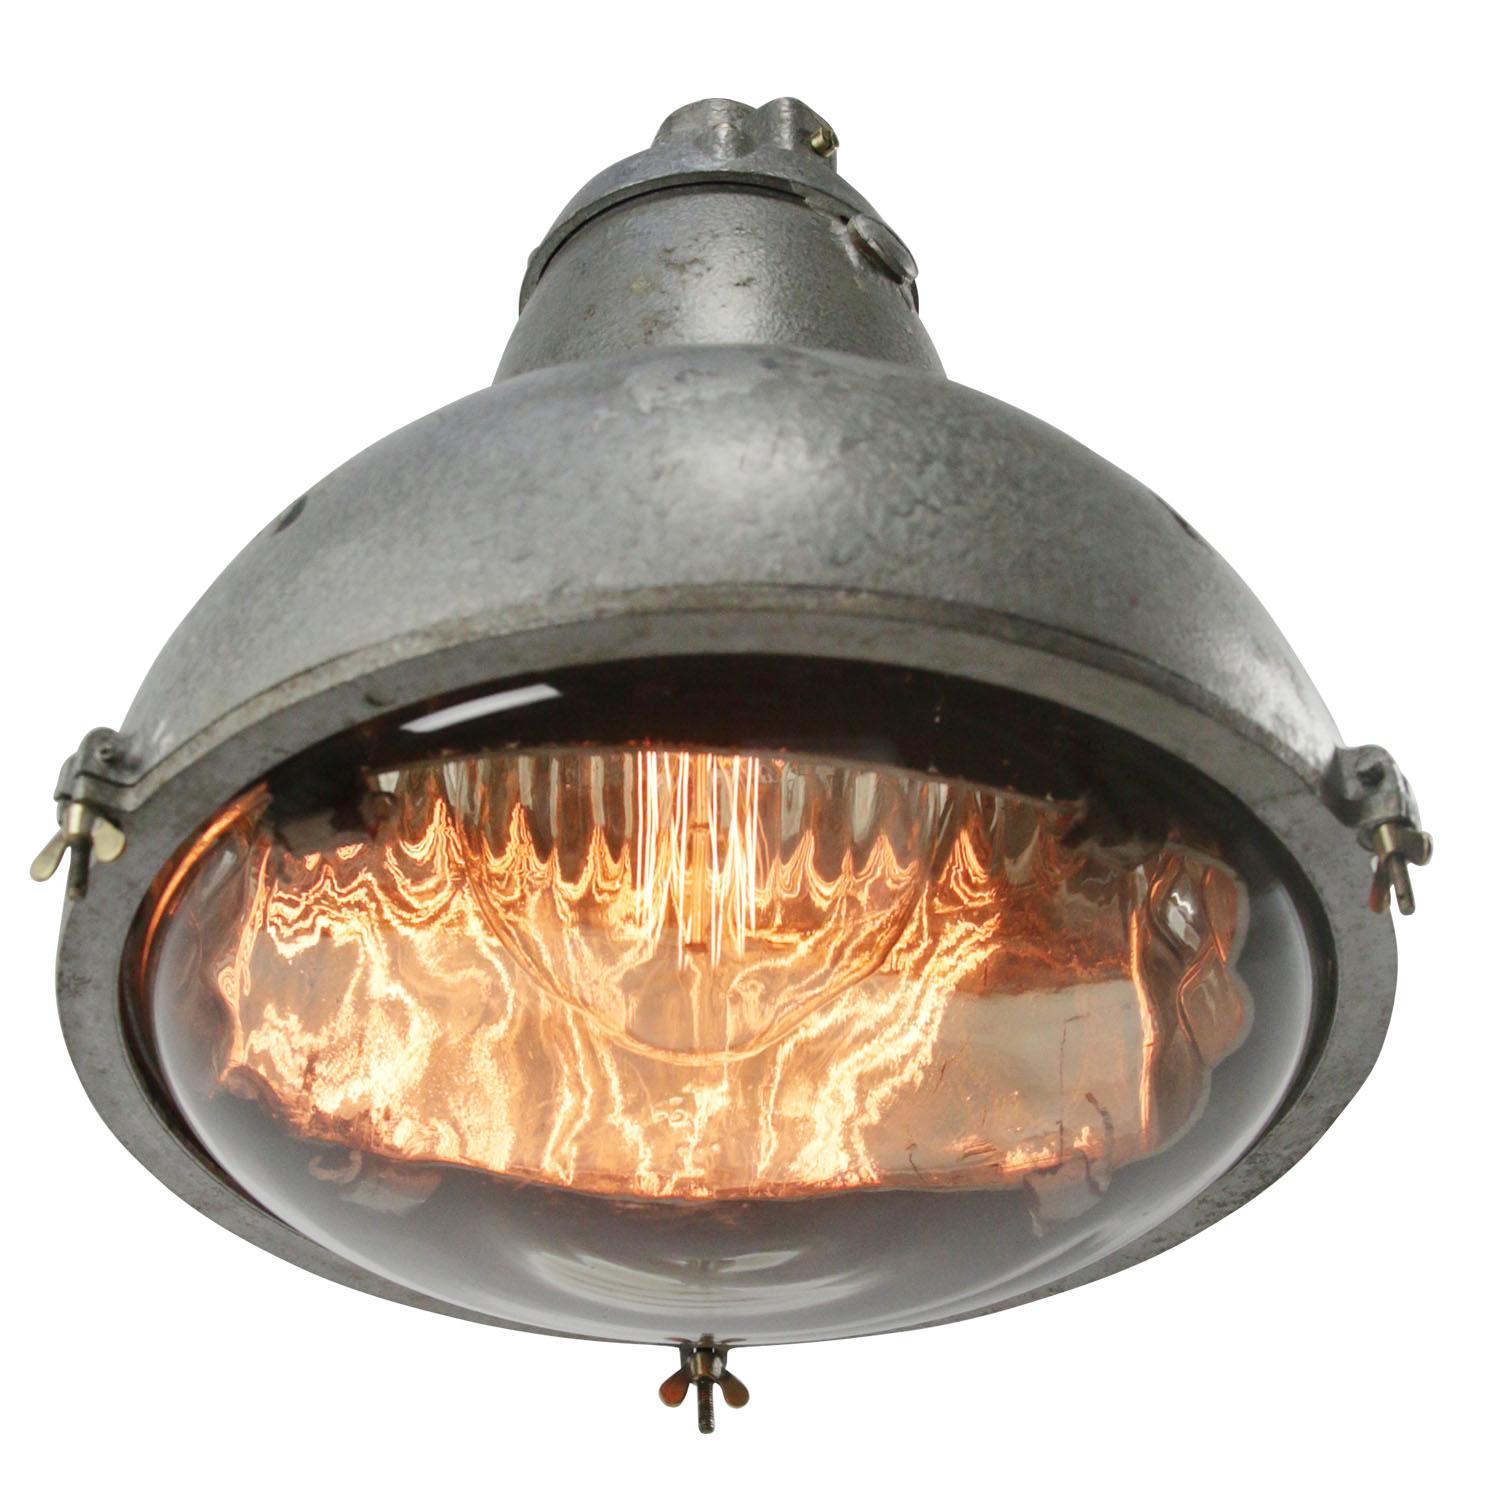 Rare French factory light
cast aluminium with clear round glass
Mercury glass mirror inside

Weight: 5.90 kg / 13 lb

Priced per individual item. All lamps have been made suitable by international standards for incandescent light bulbs,